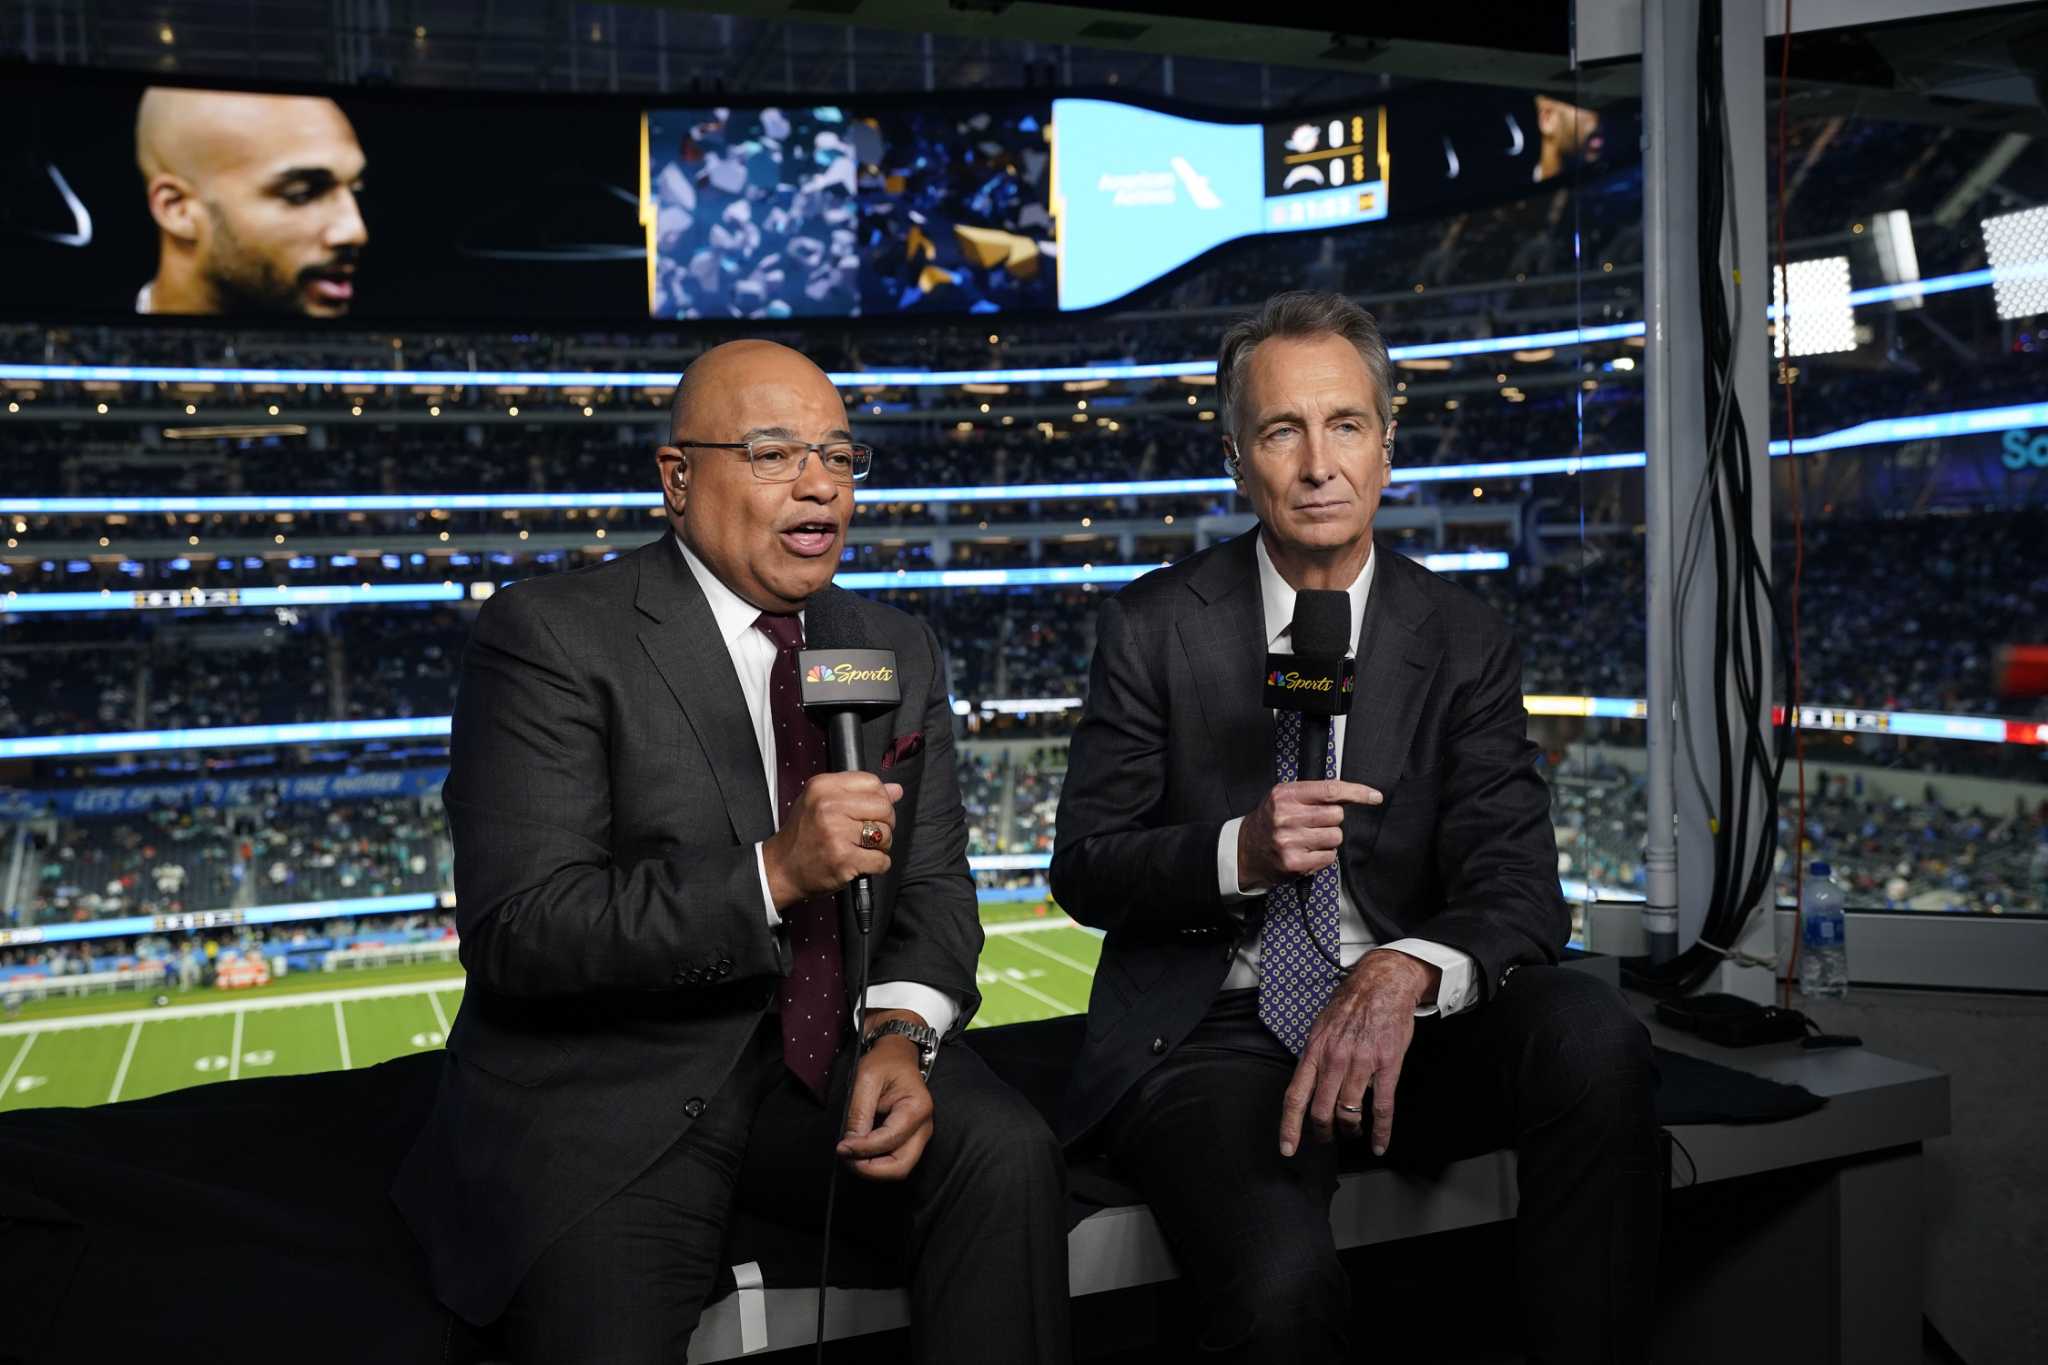 CT-based NBC Sports' Sunday NFL games get nearly 20M viewers